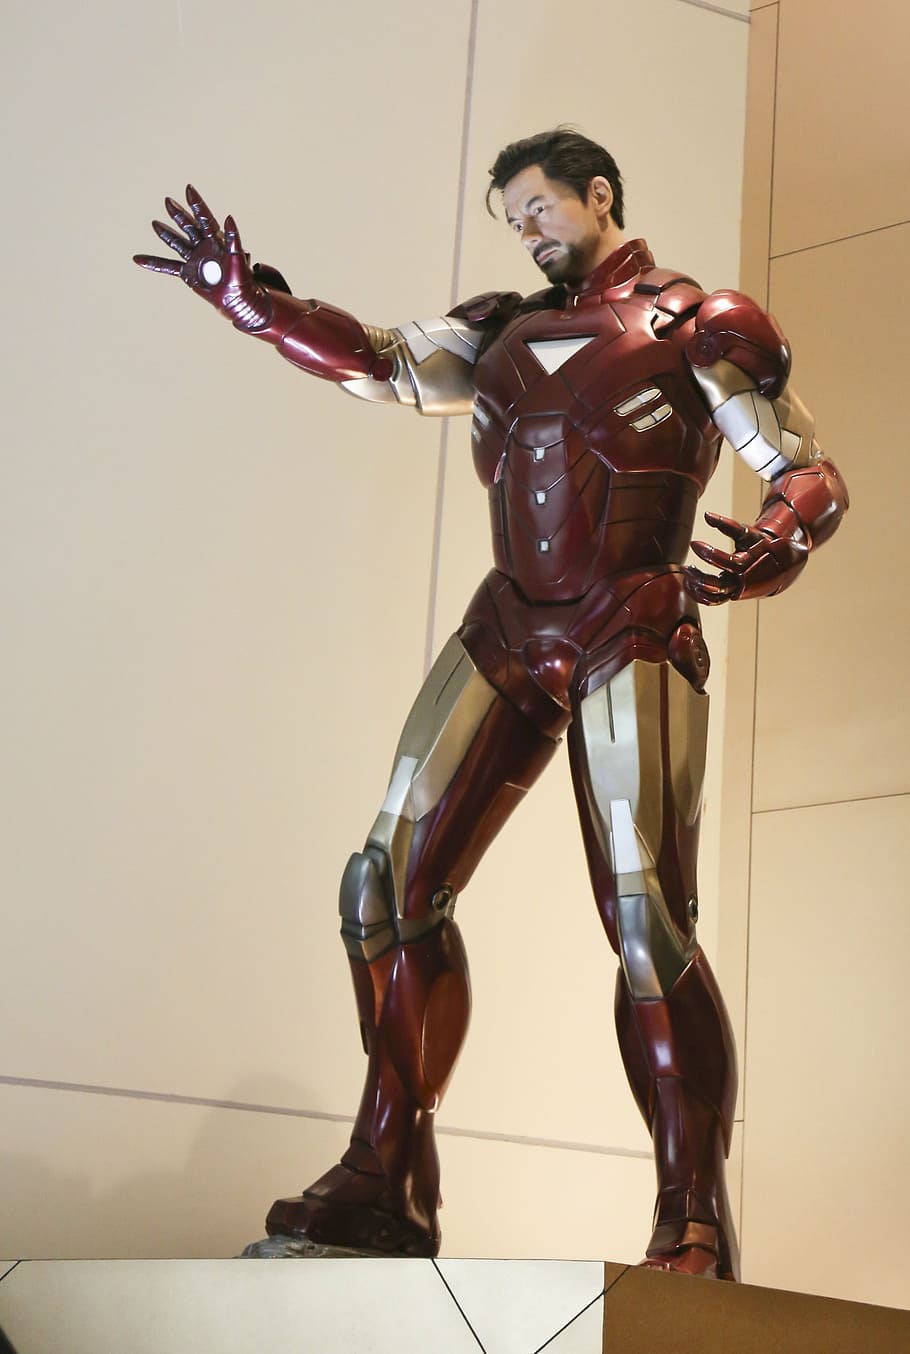 iron man, mannequin, movies, hero, full length, one person, indoors, lifestyles, portrait, real people